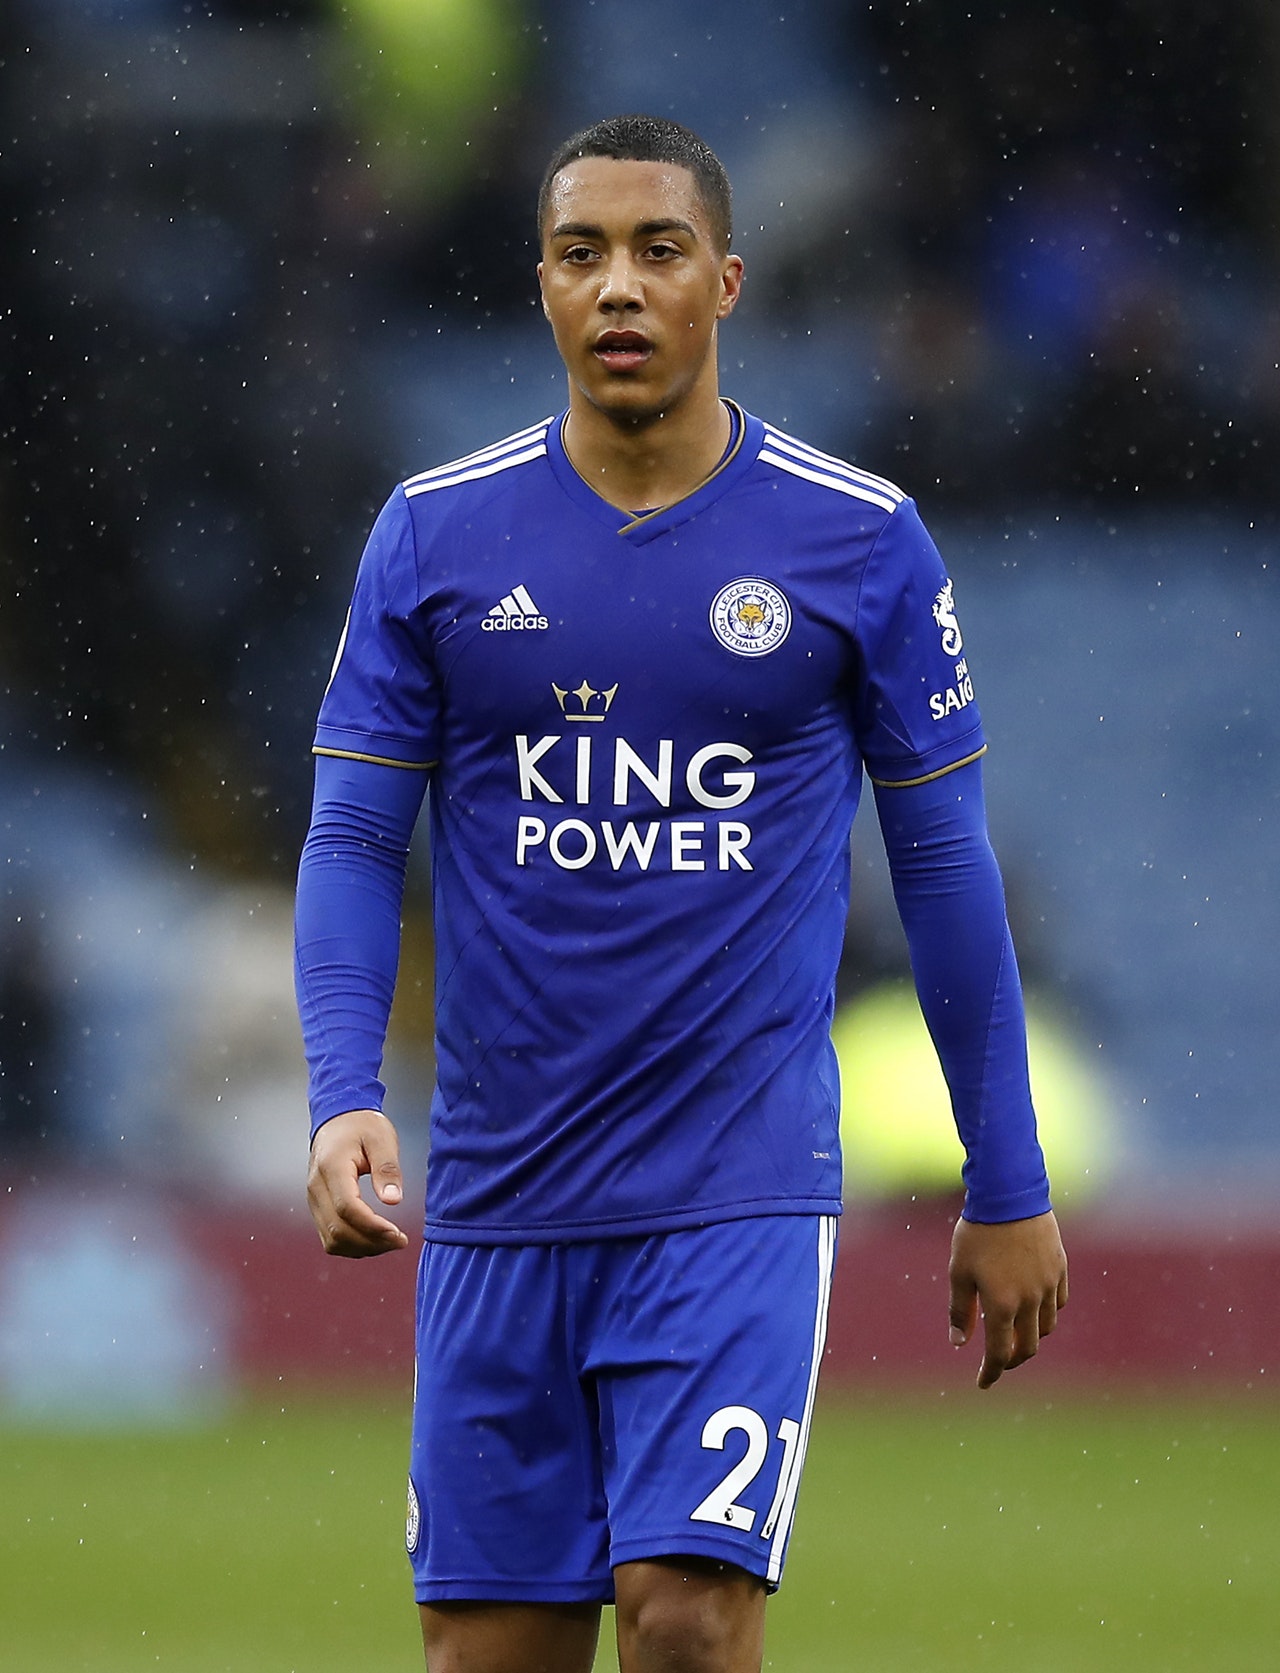 Tielemans Satisfied With Performance After Loss